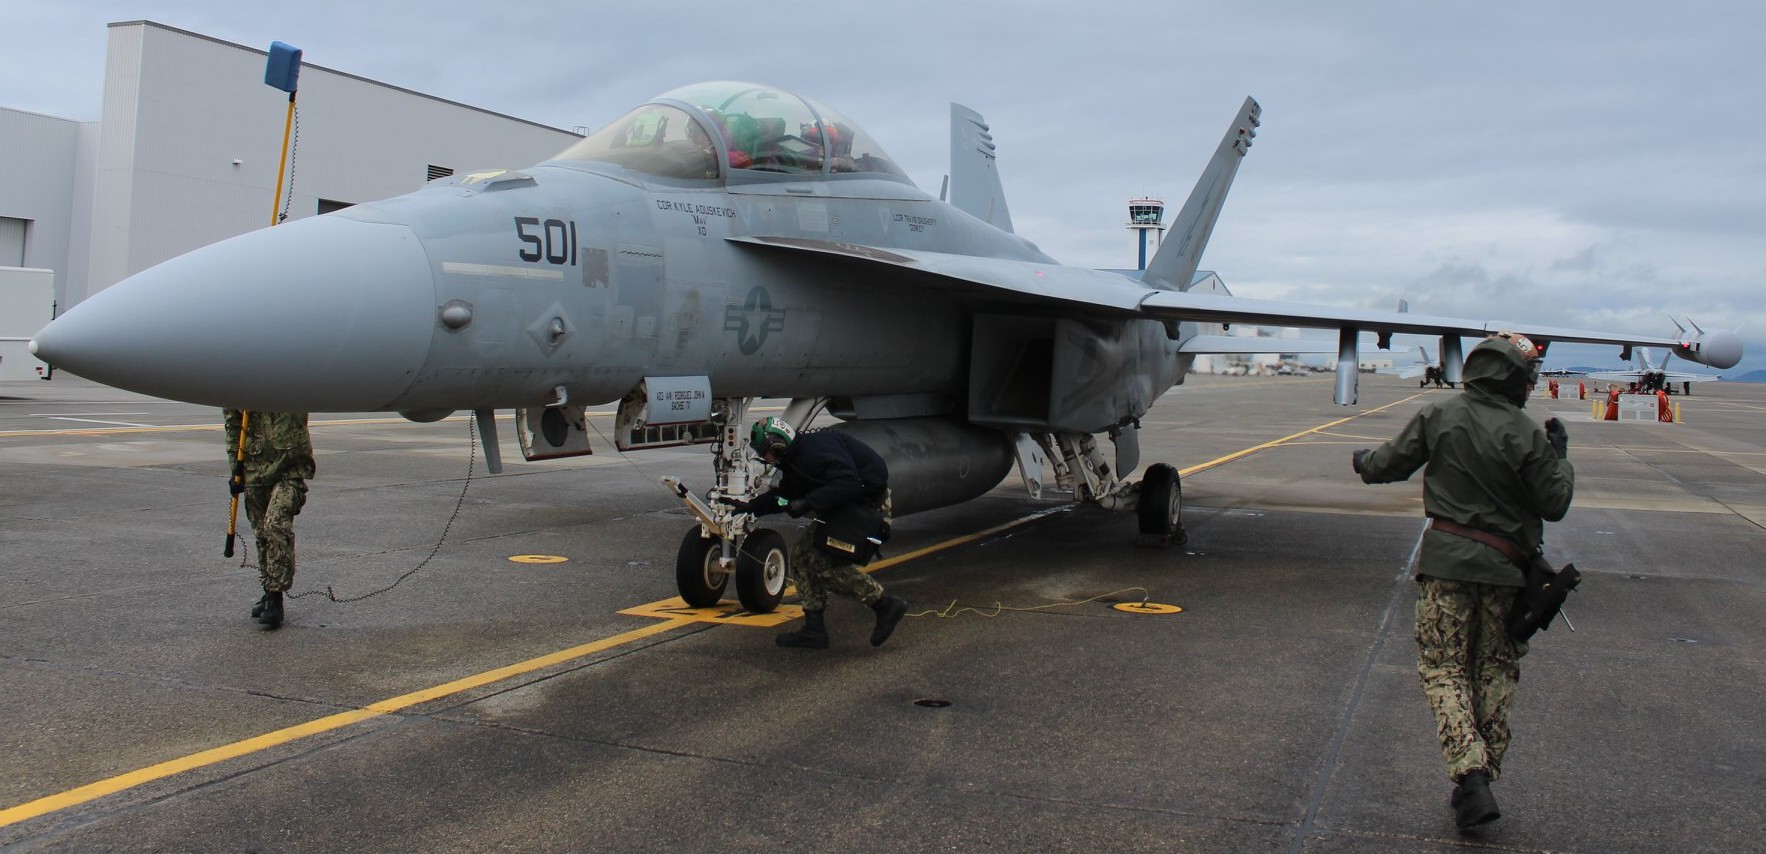 vaq-133 wizards electronic attack squadron vaqron us navy boeing ea-18g growler nas whidbey island 59